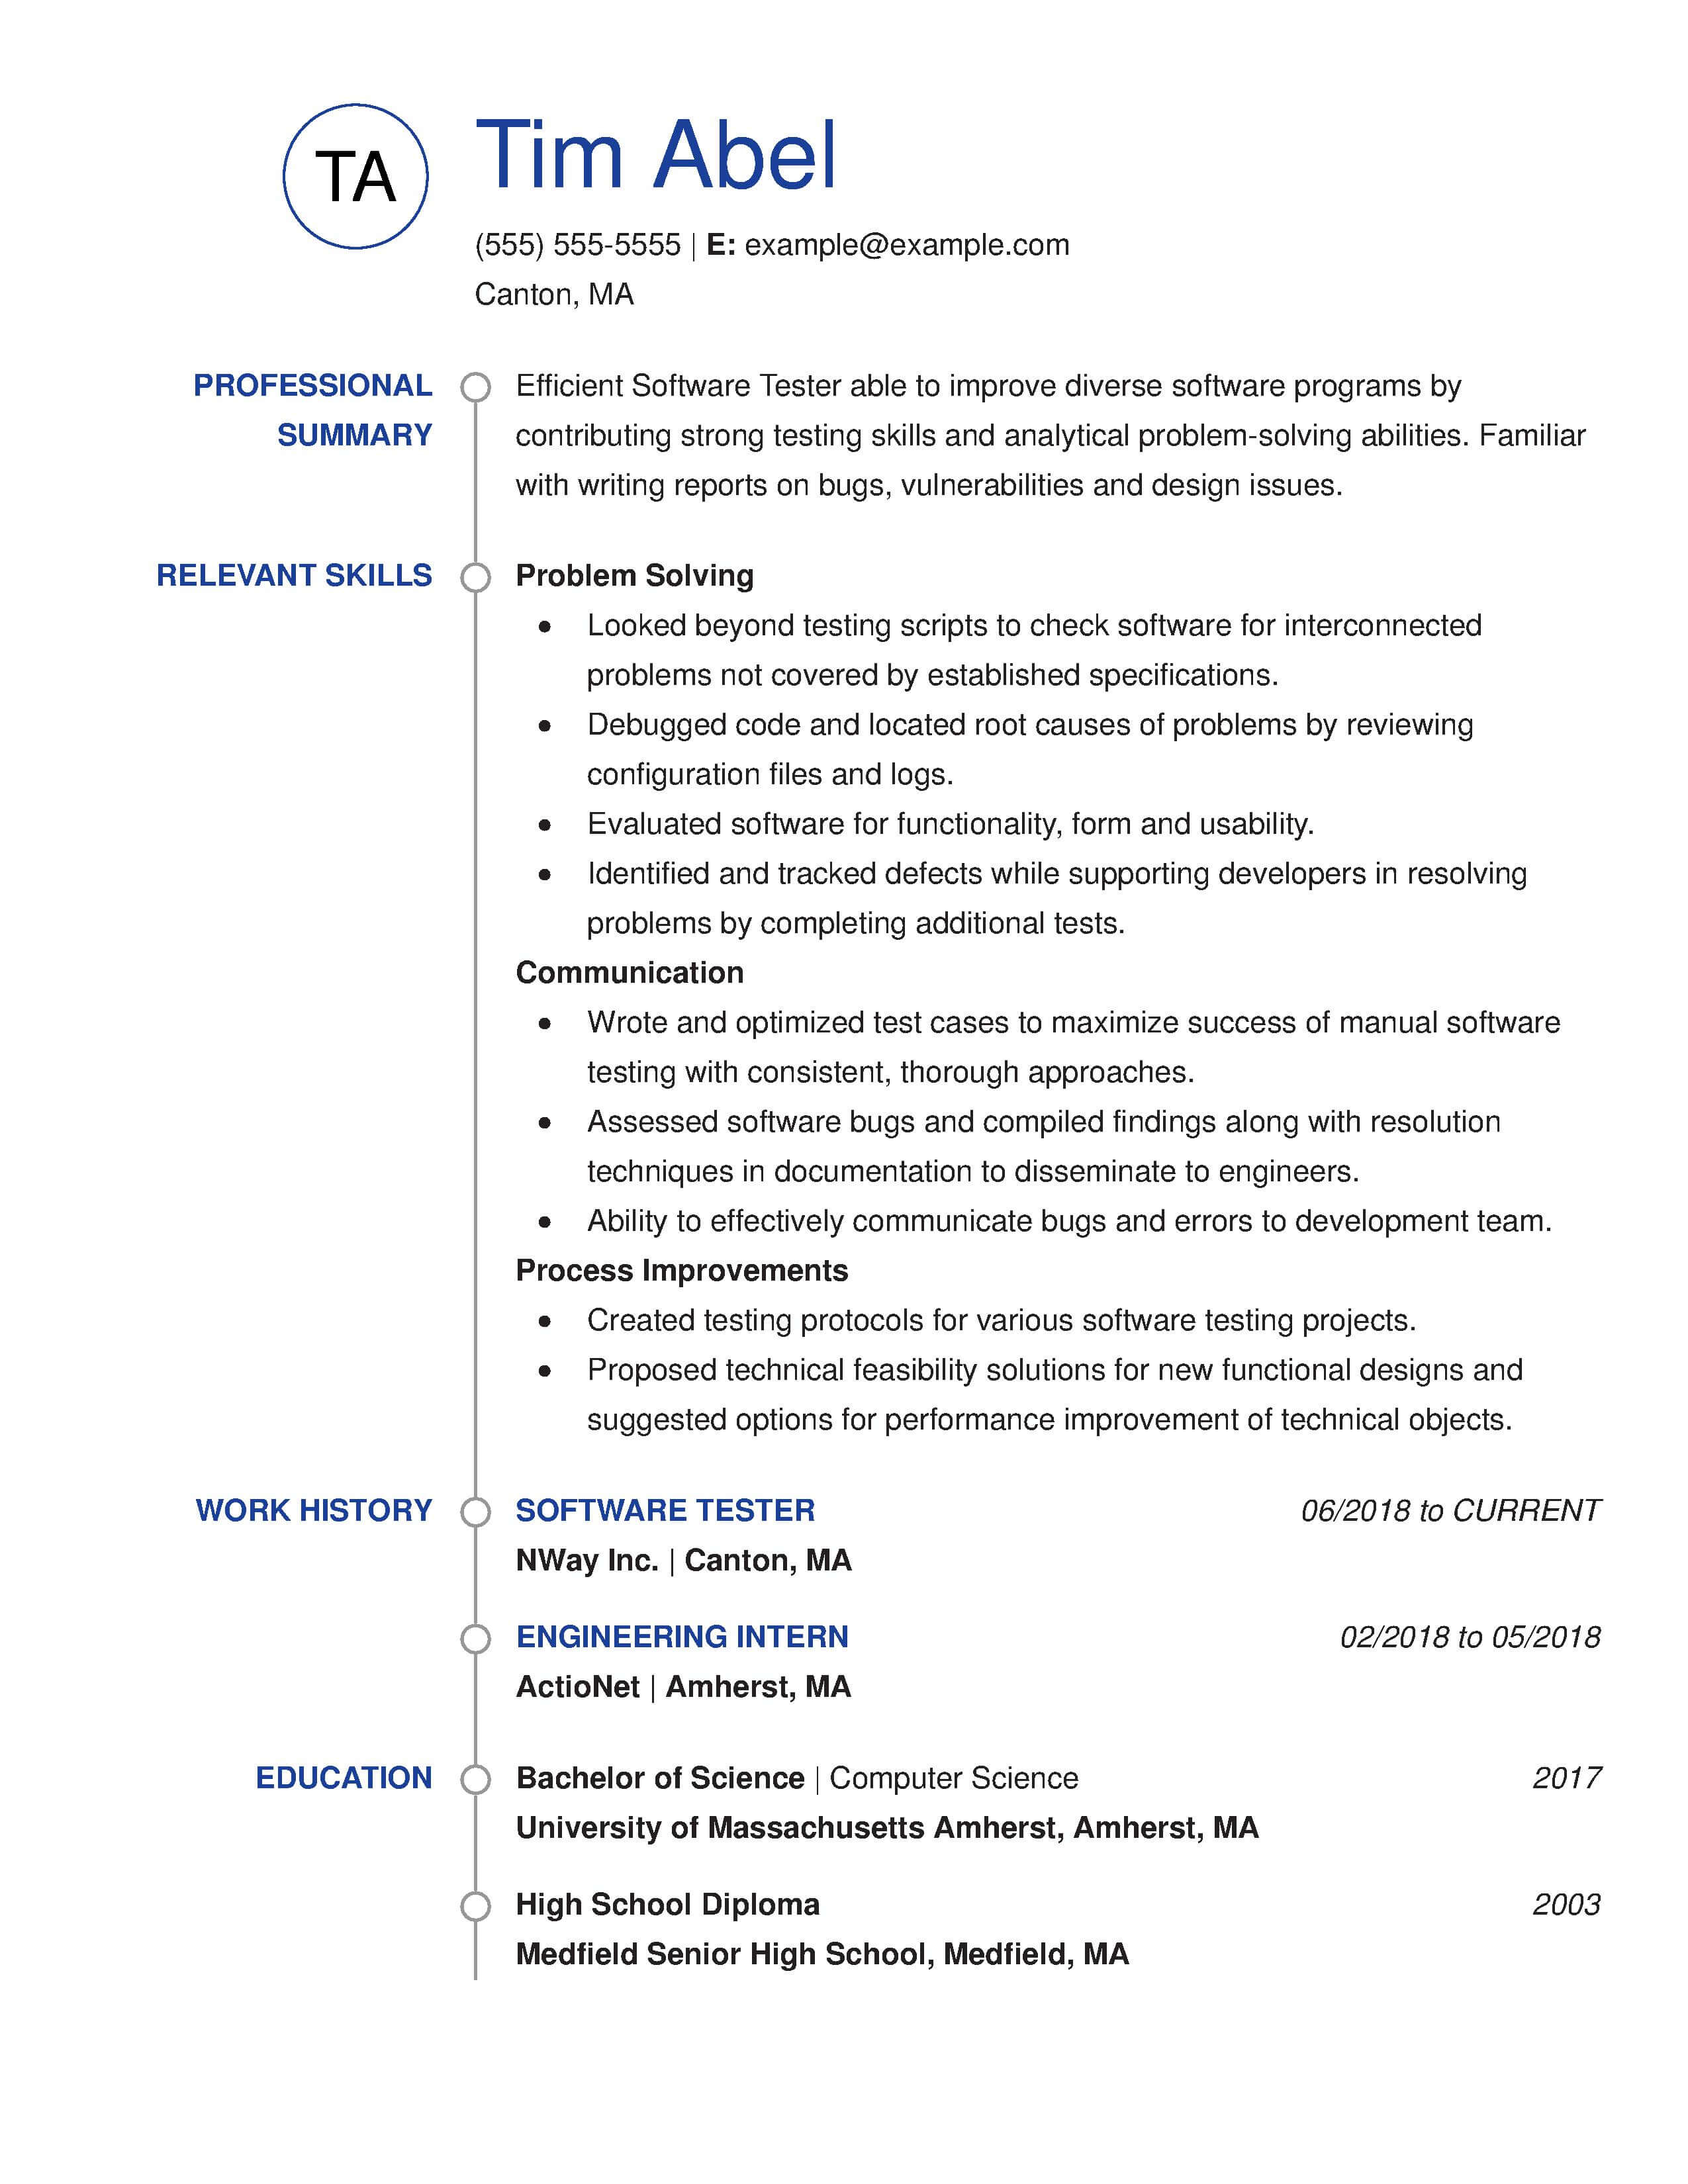 Good Resume Examples 30 Resume Examples View Industry Job Title